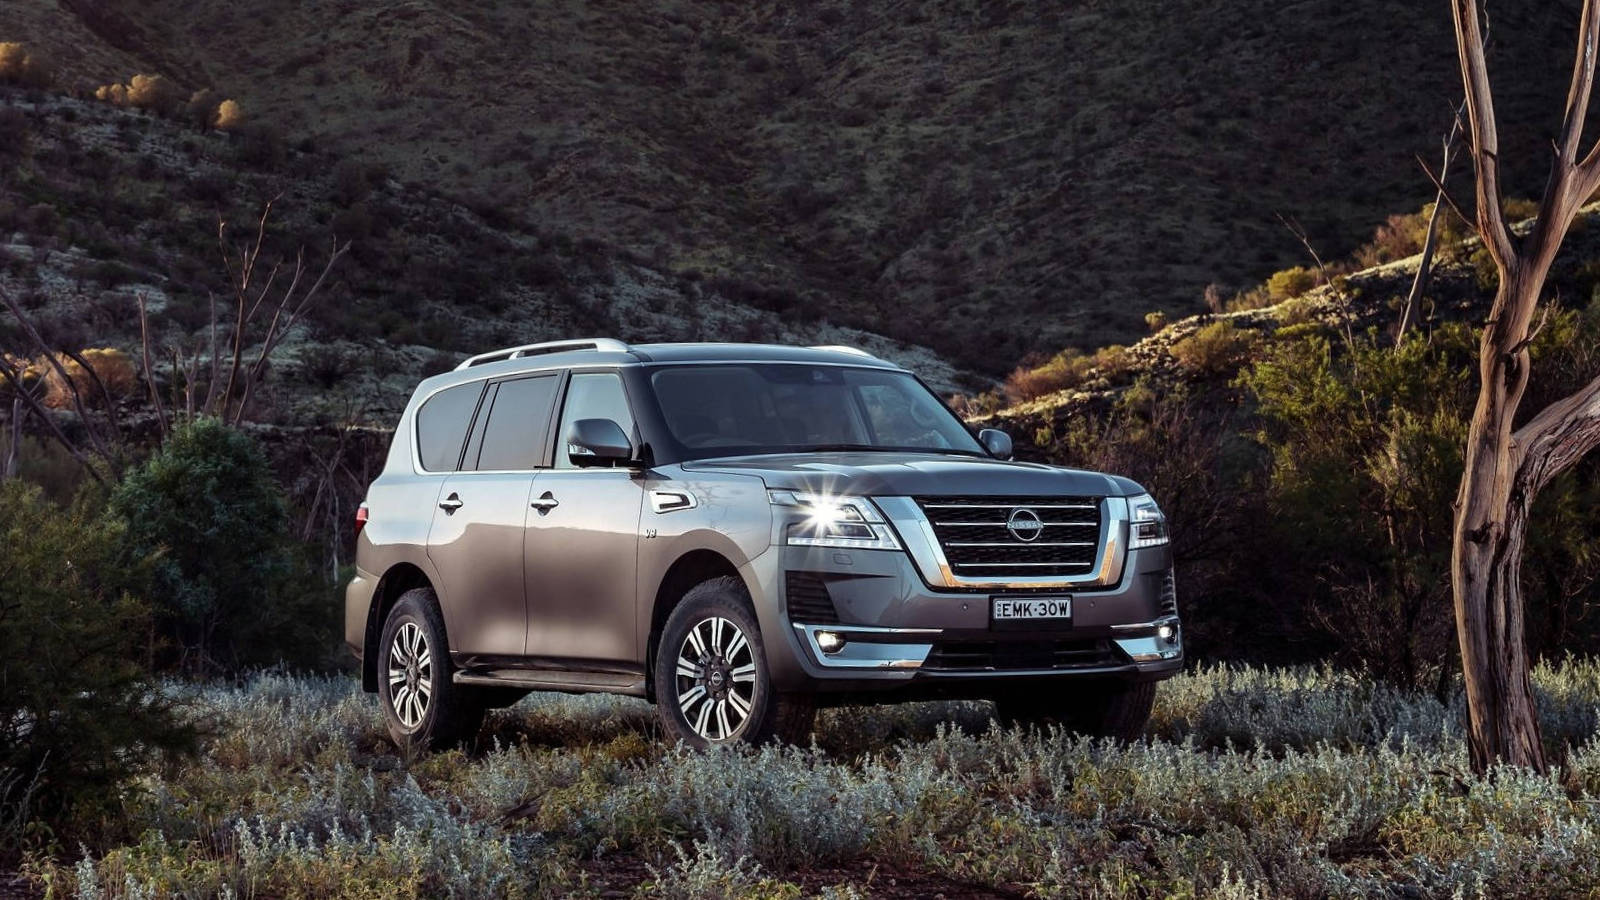 Nissan Patrol Review: The Ideal Go-Anywhere Family SUV